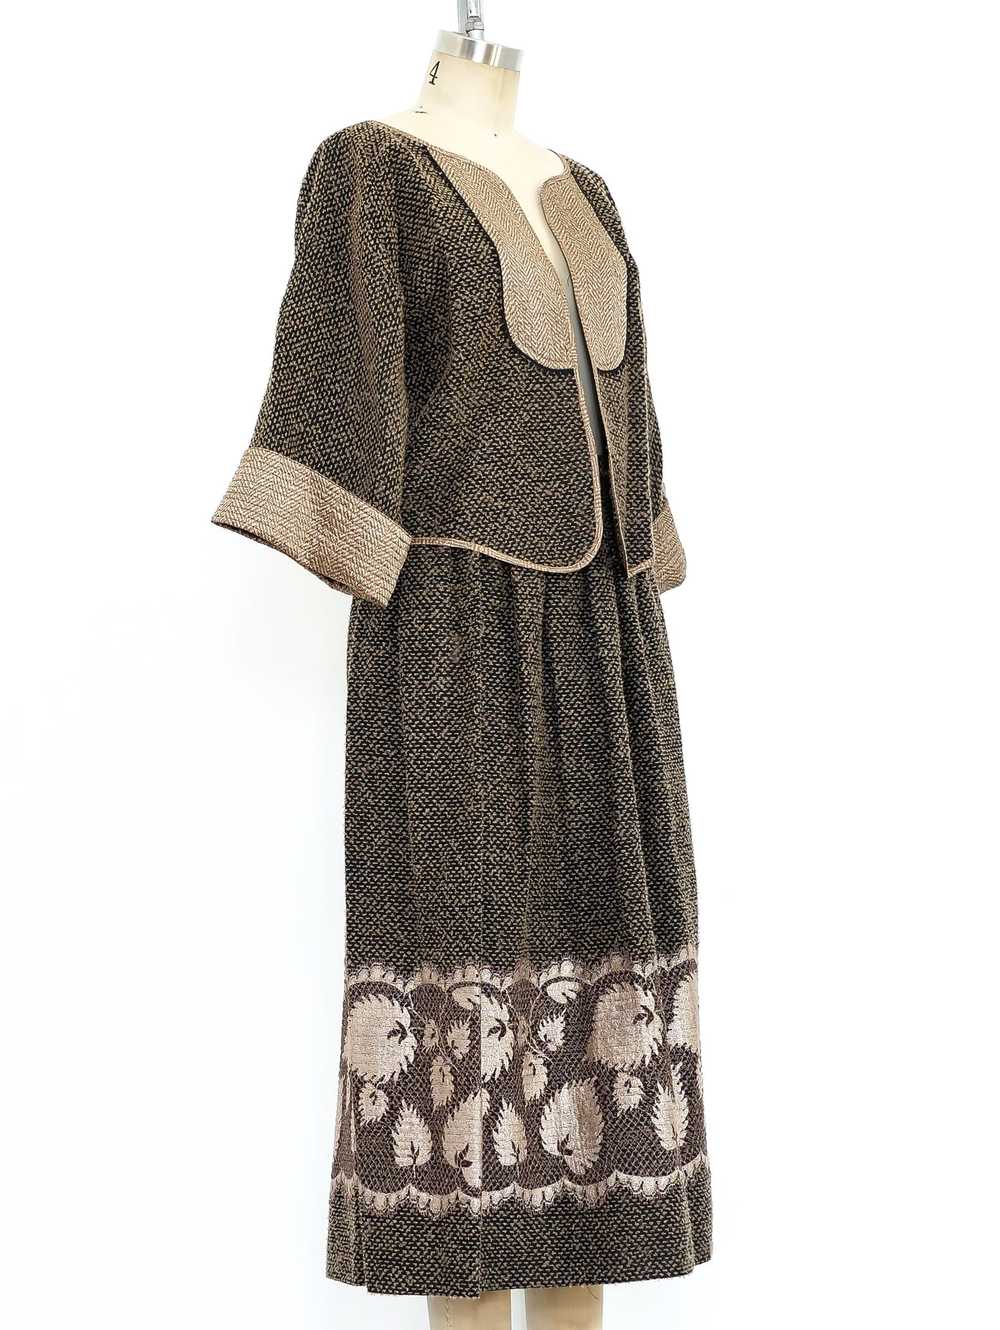 Geoffrey Beene Tweed and Lace Skirt Ensemble - image 3